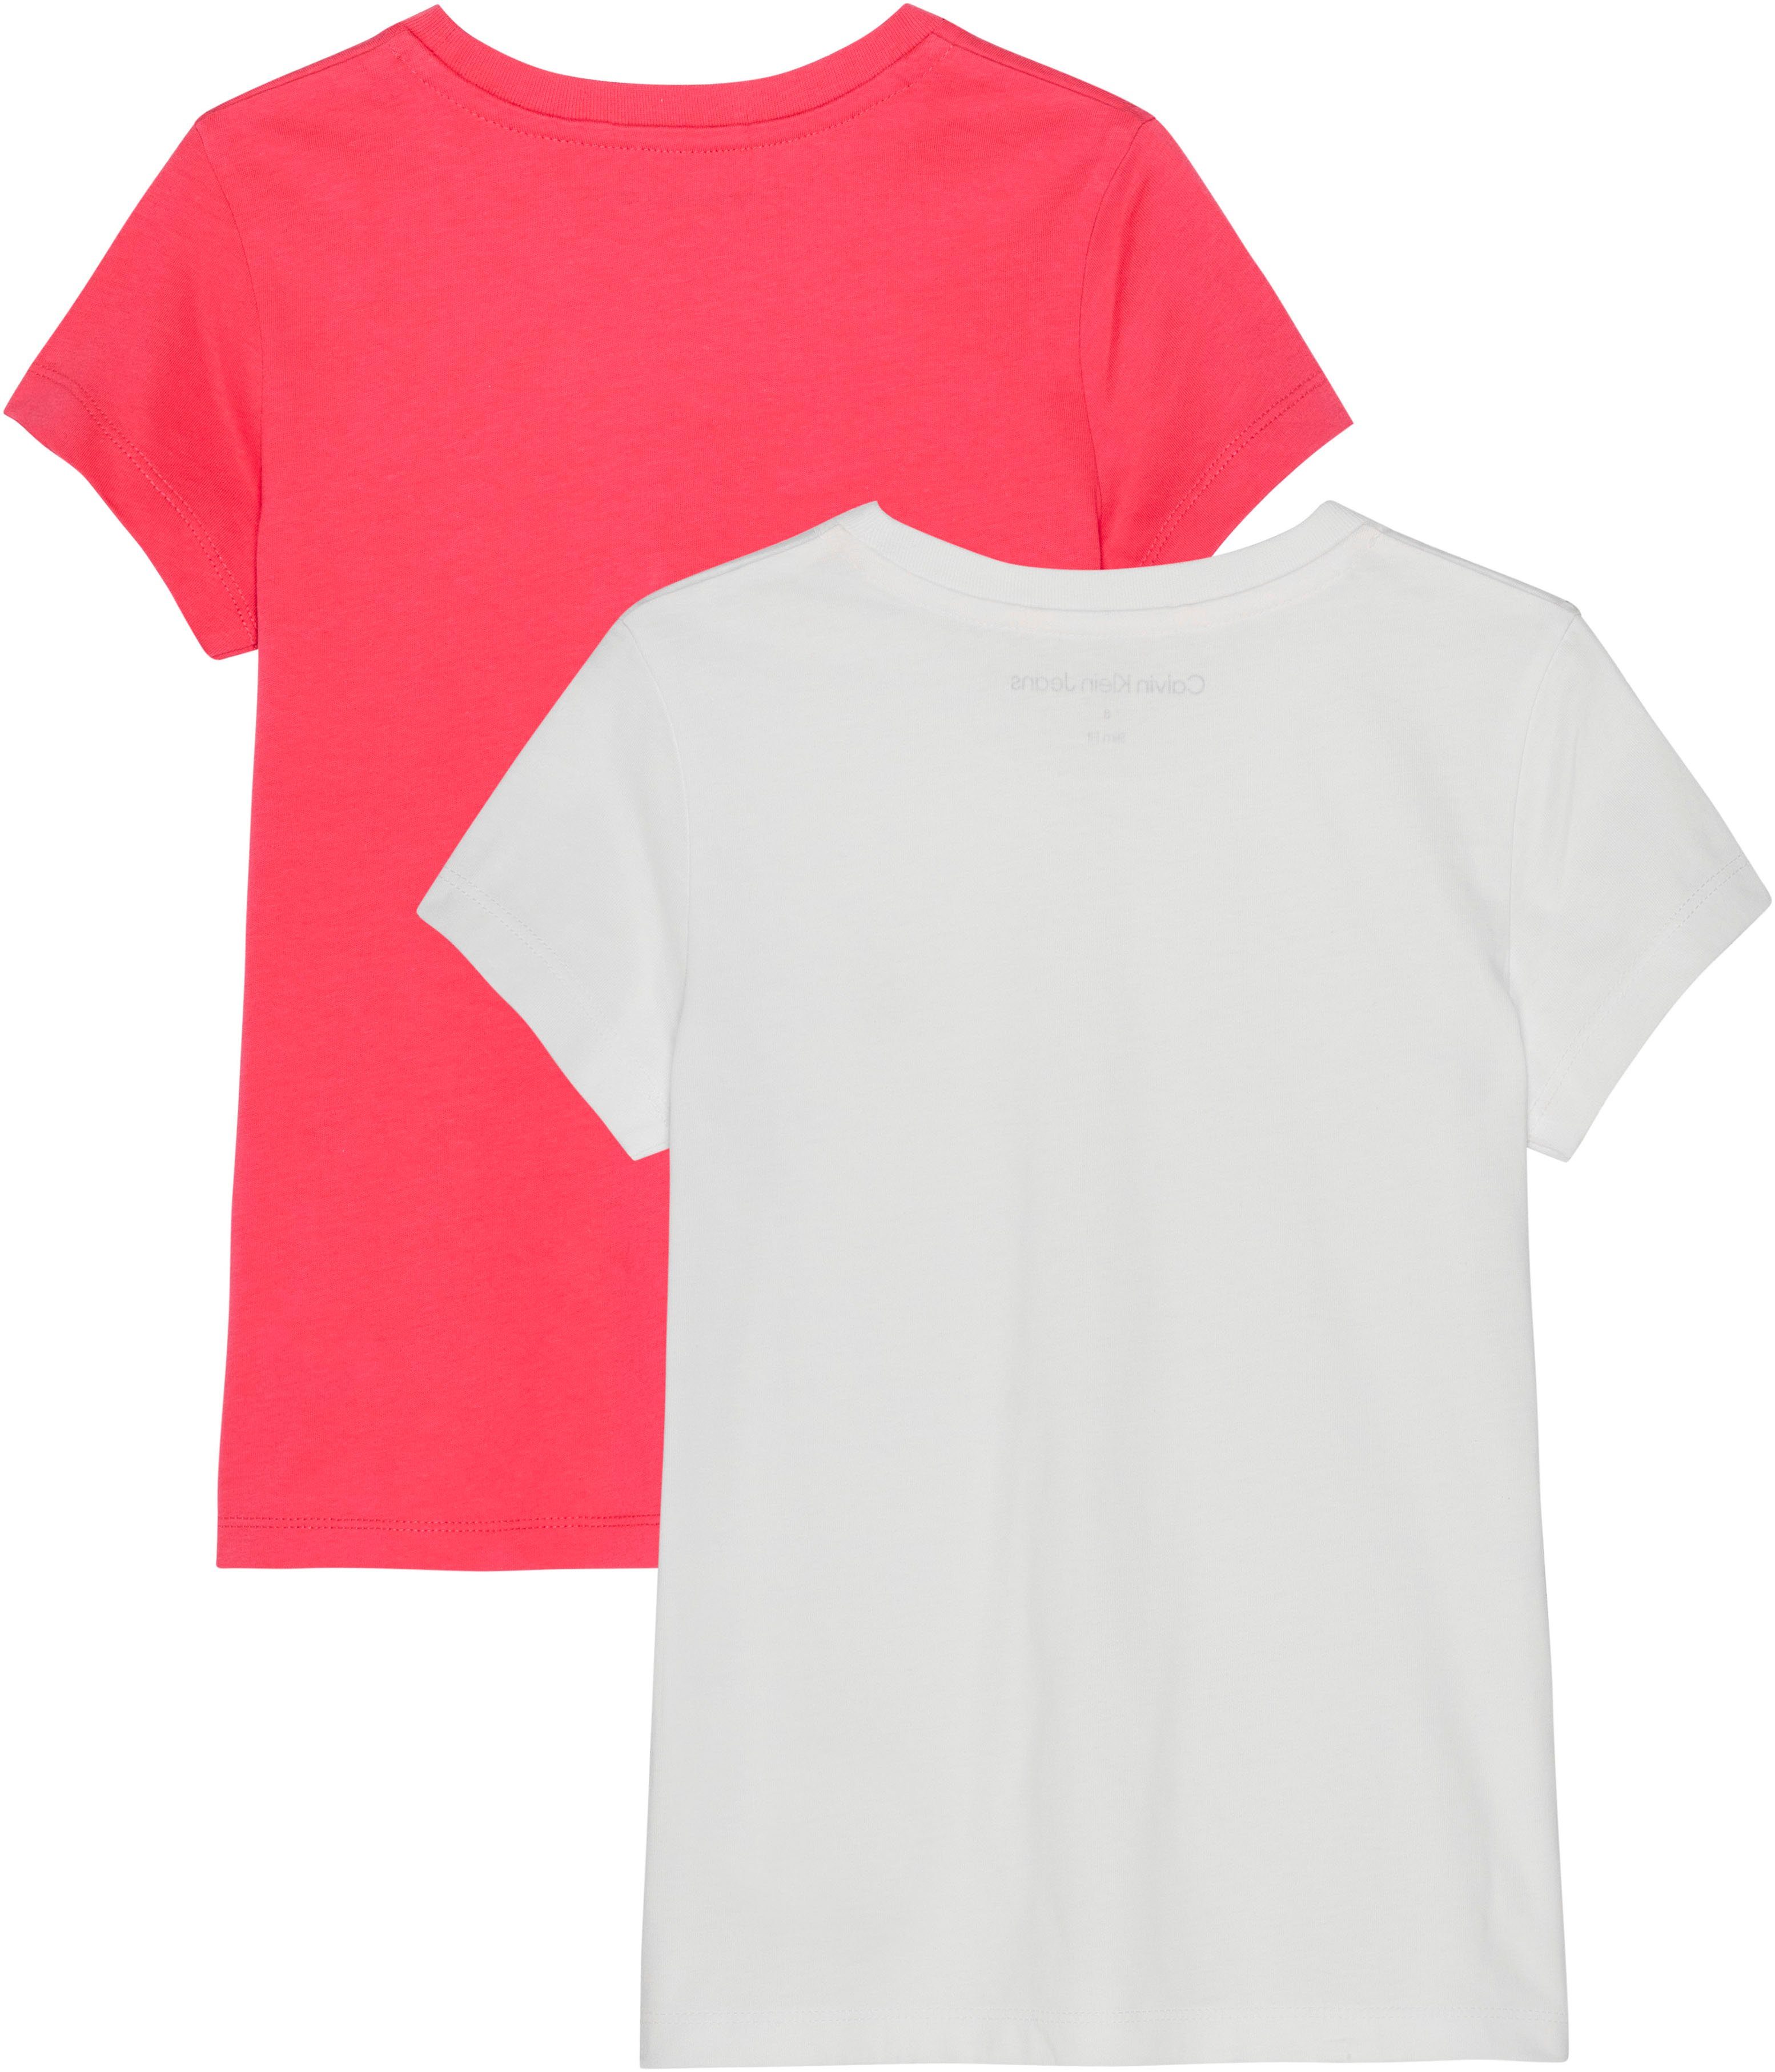 Jeans Bright MONOGRAM TOP T-Shirt Klein White 2-tlg) Teaberry (Packung, Calvin SLIM 2-PACK /